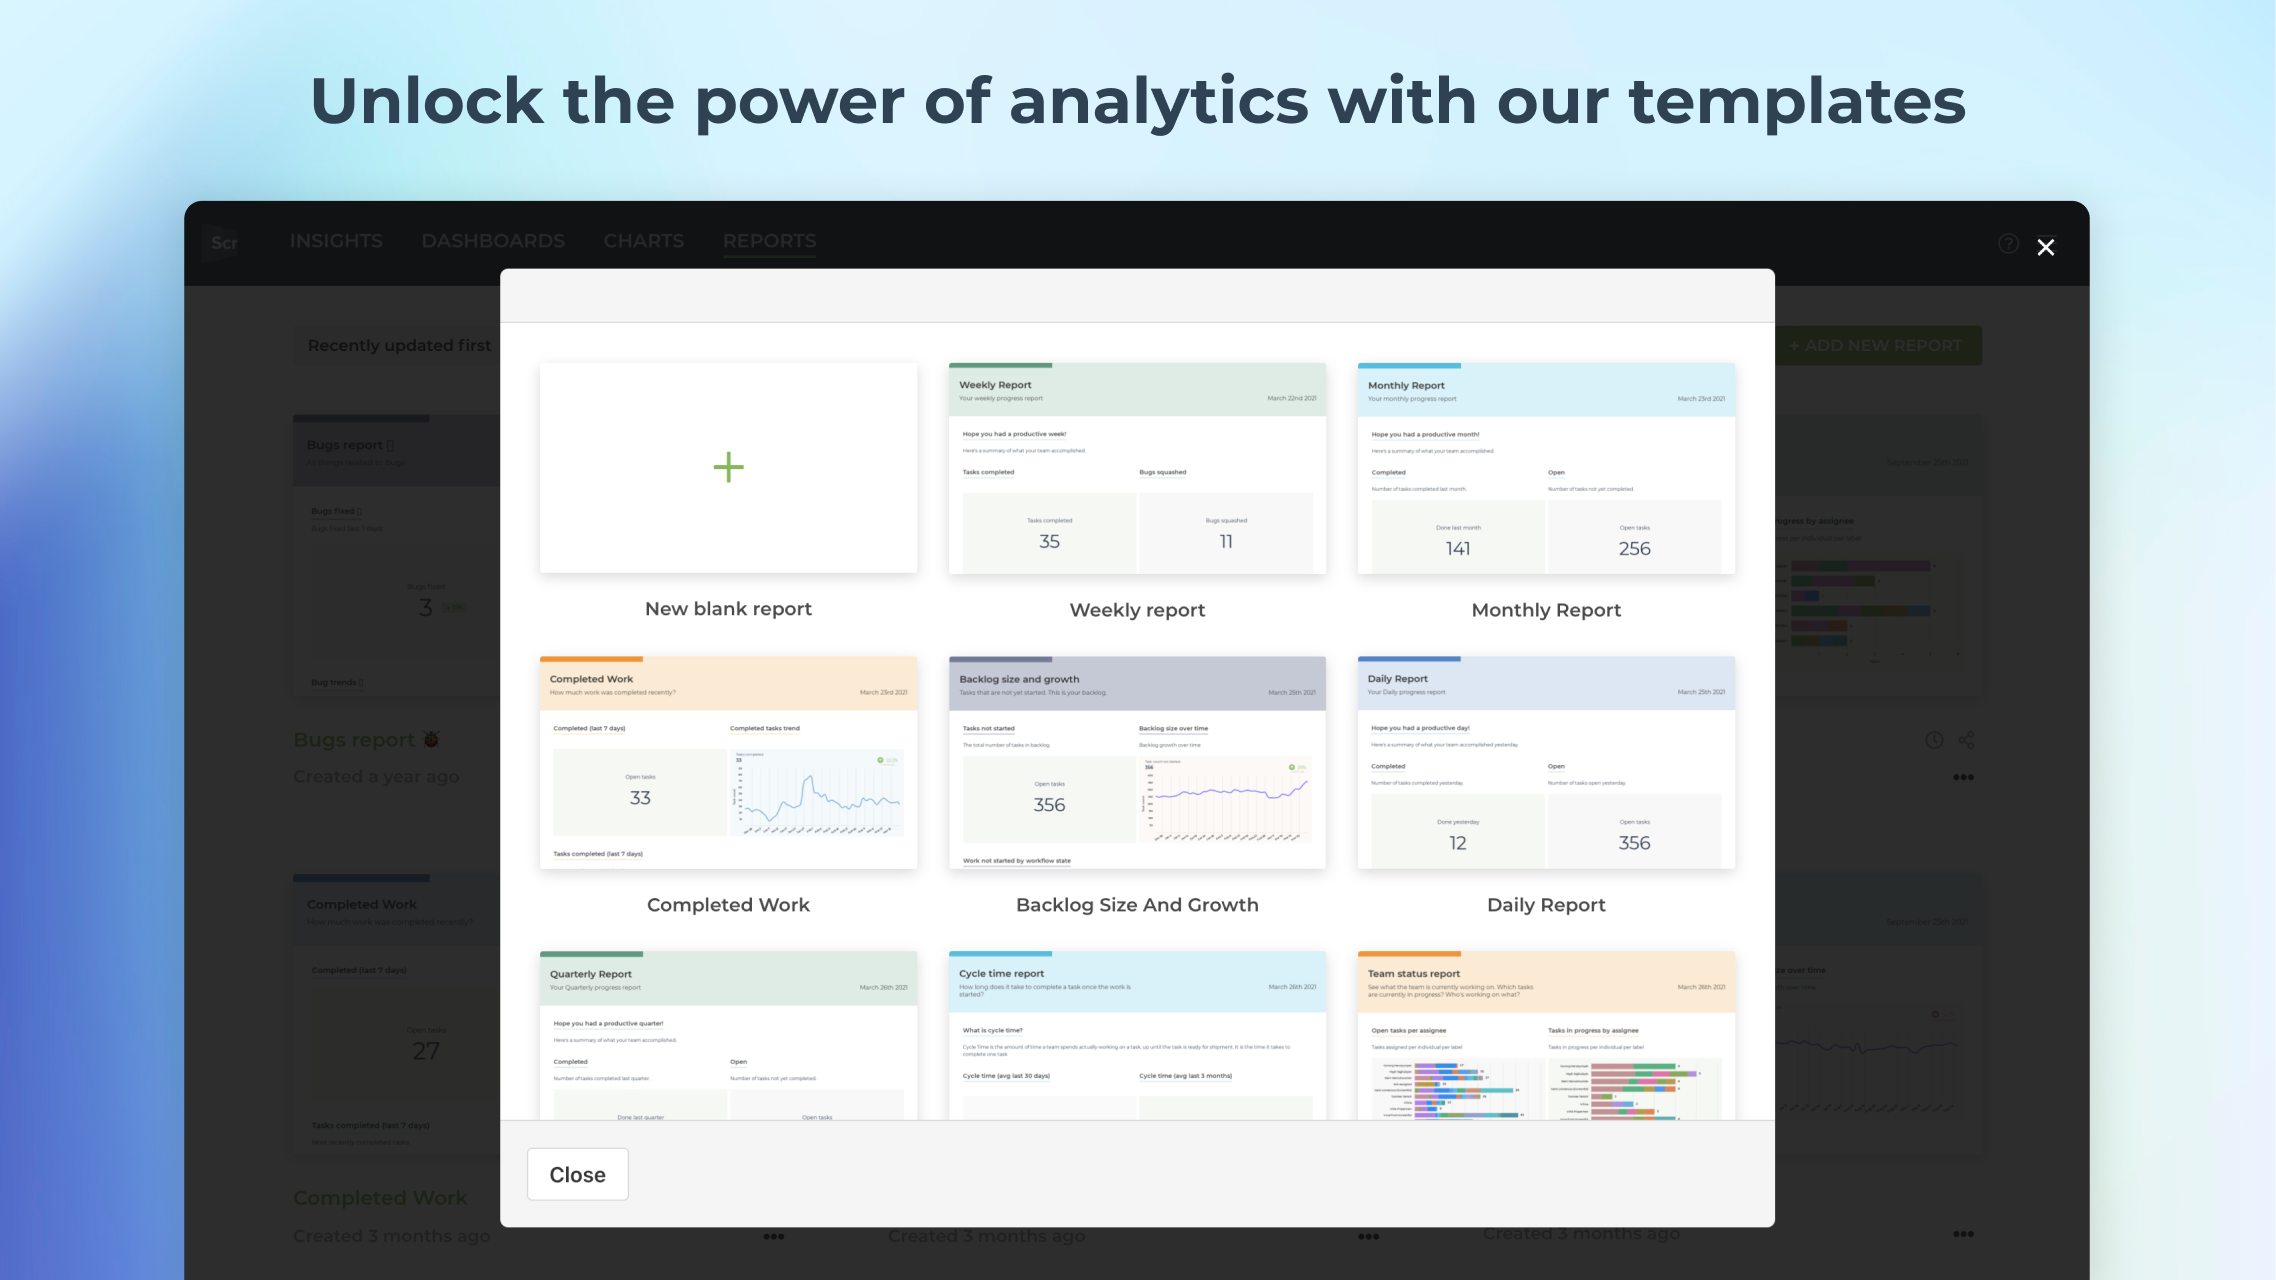 Most companies measure the same things. So we created a set of templates that help you get value from your data faster. Just pick a template and get started.